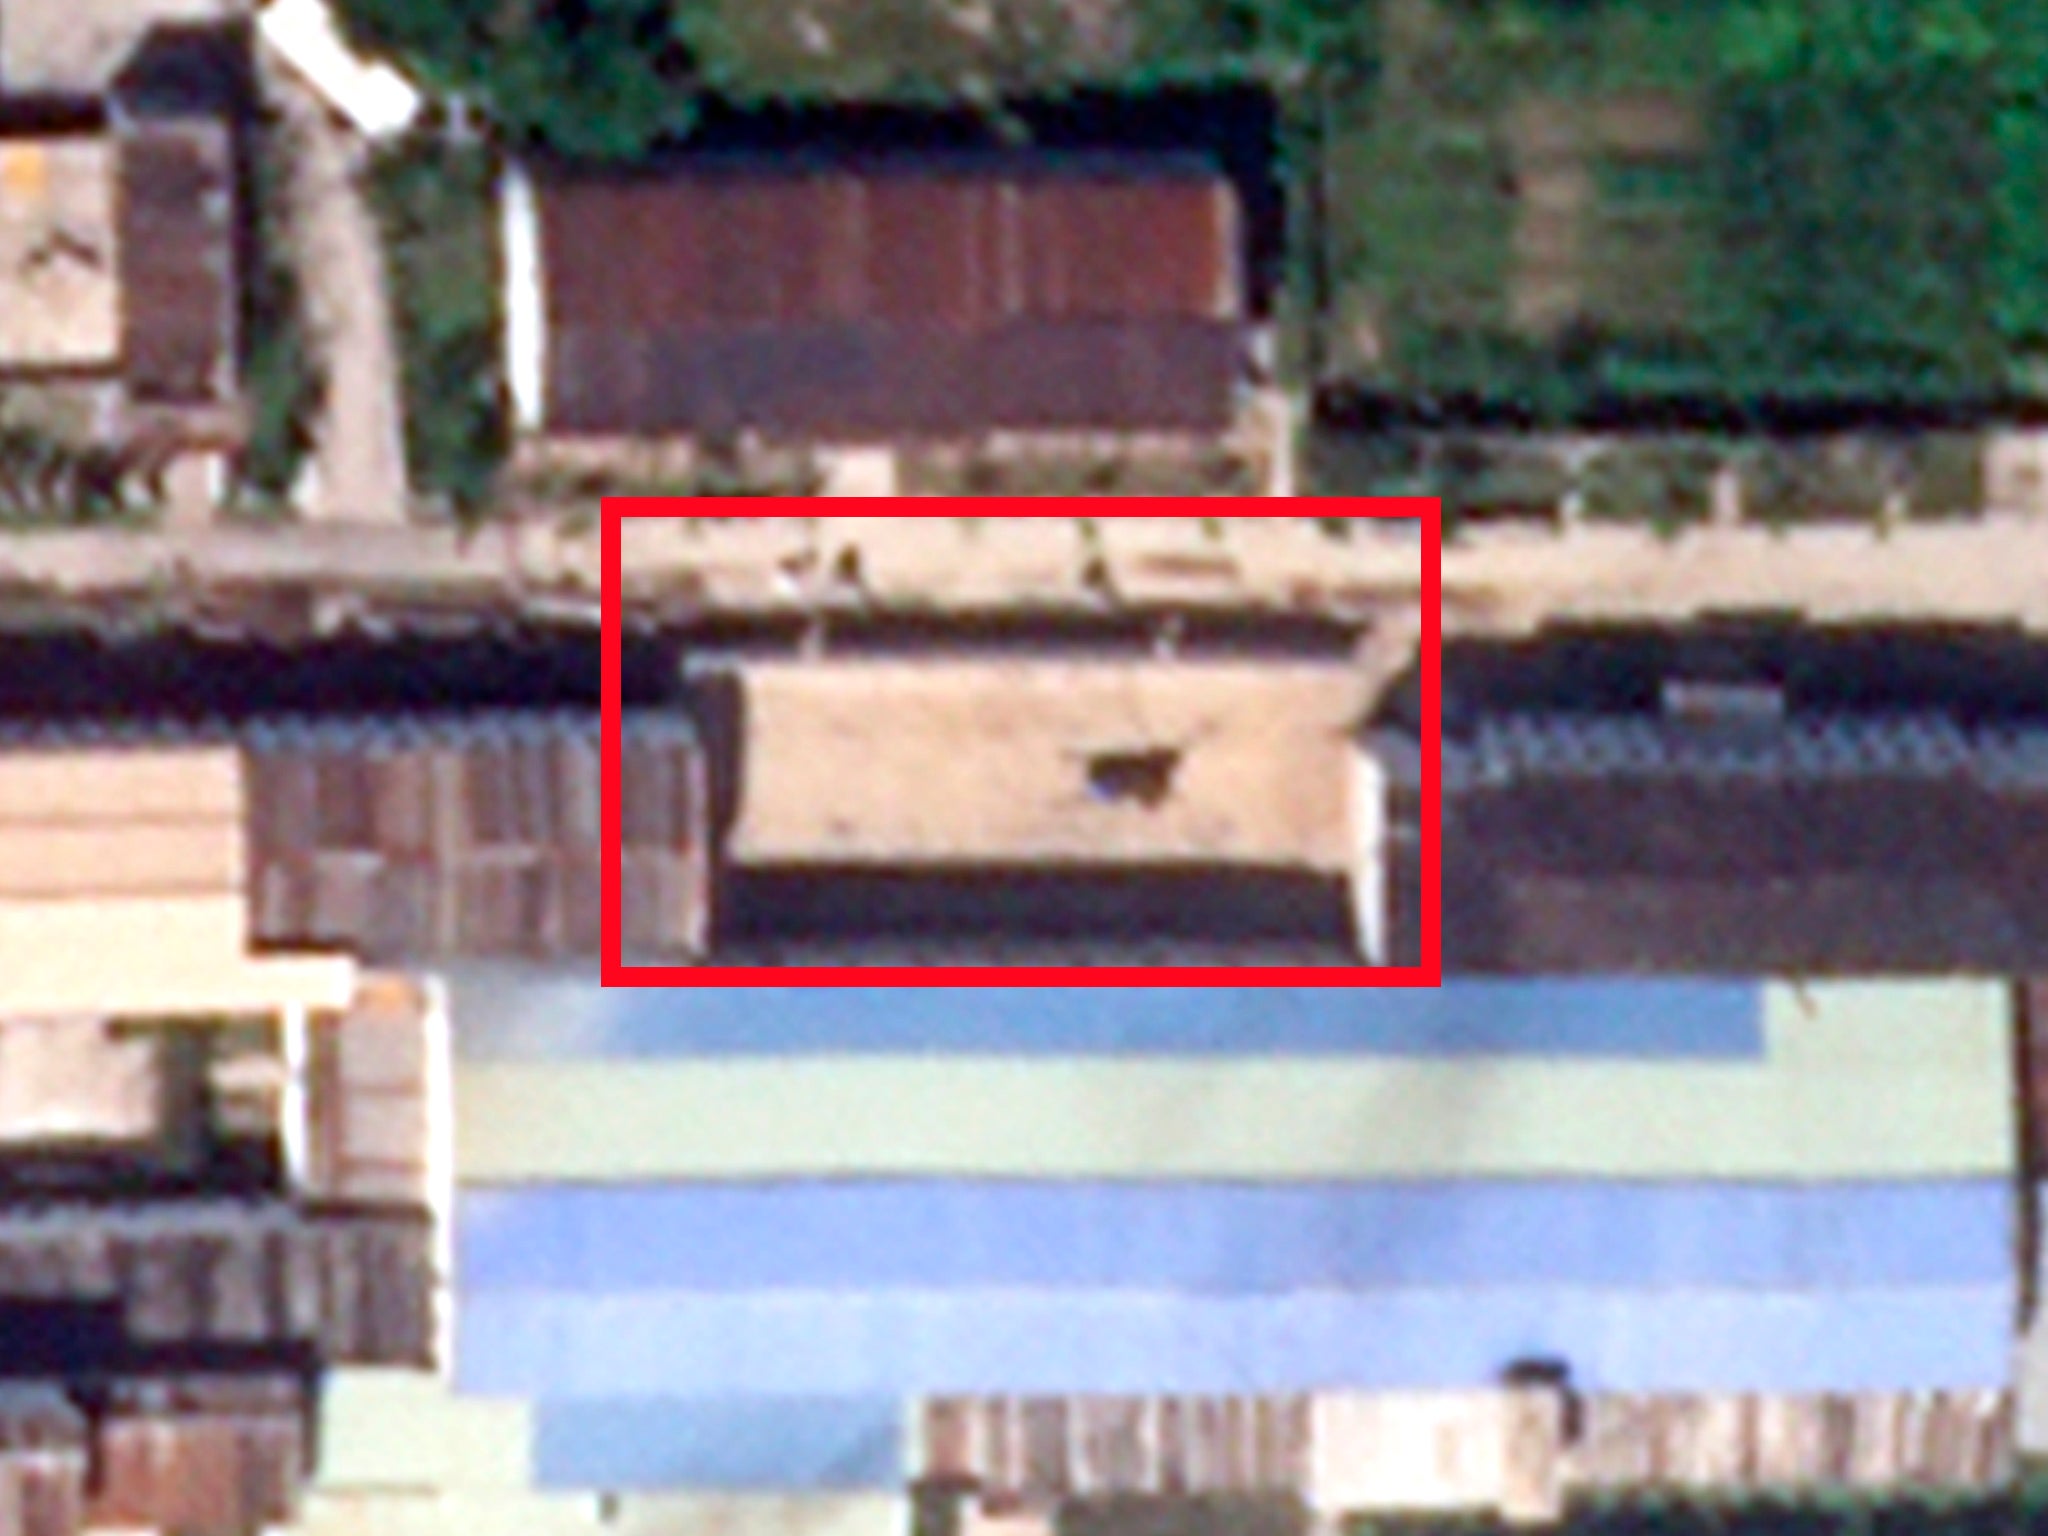 Construction site highlighted, with current enrichment building below